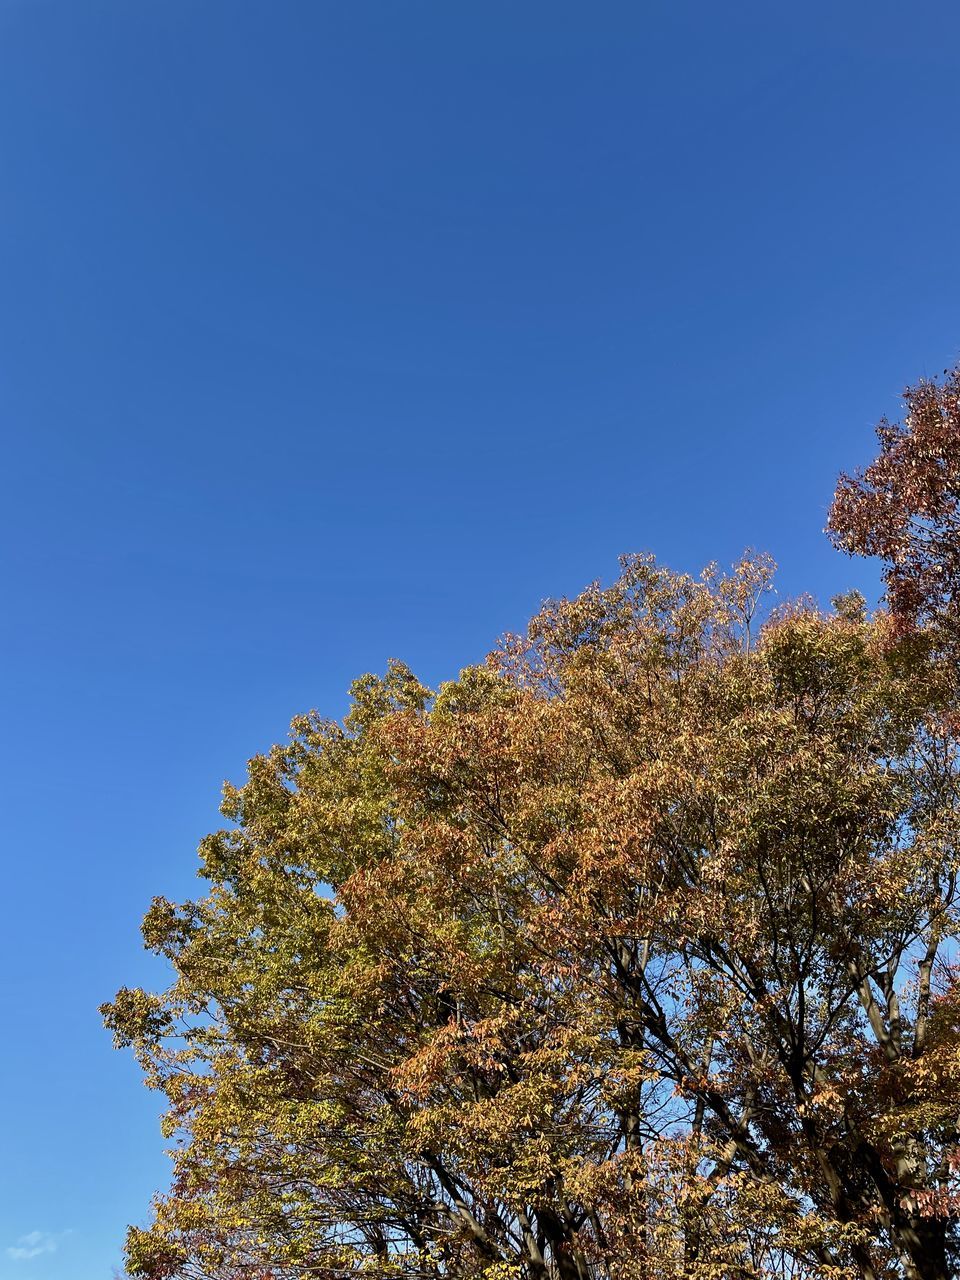 tree, plant, sky, nature, leaf, blue, autumn, clear sky, low angle view, beauty in nature, no people, growth, flower, sunlight, cloud, outdoors, tranquility, day, scenics - nature, branch, treetop, copy space, sunny